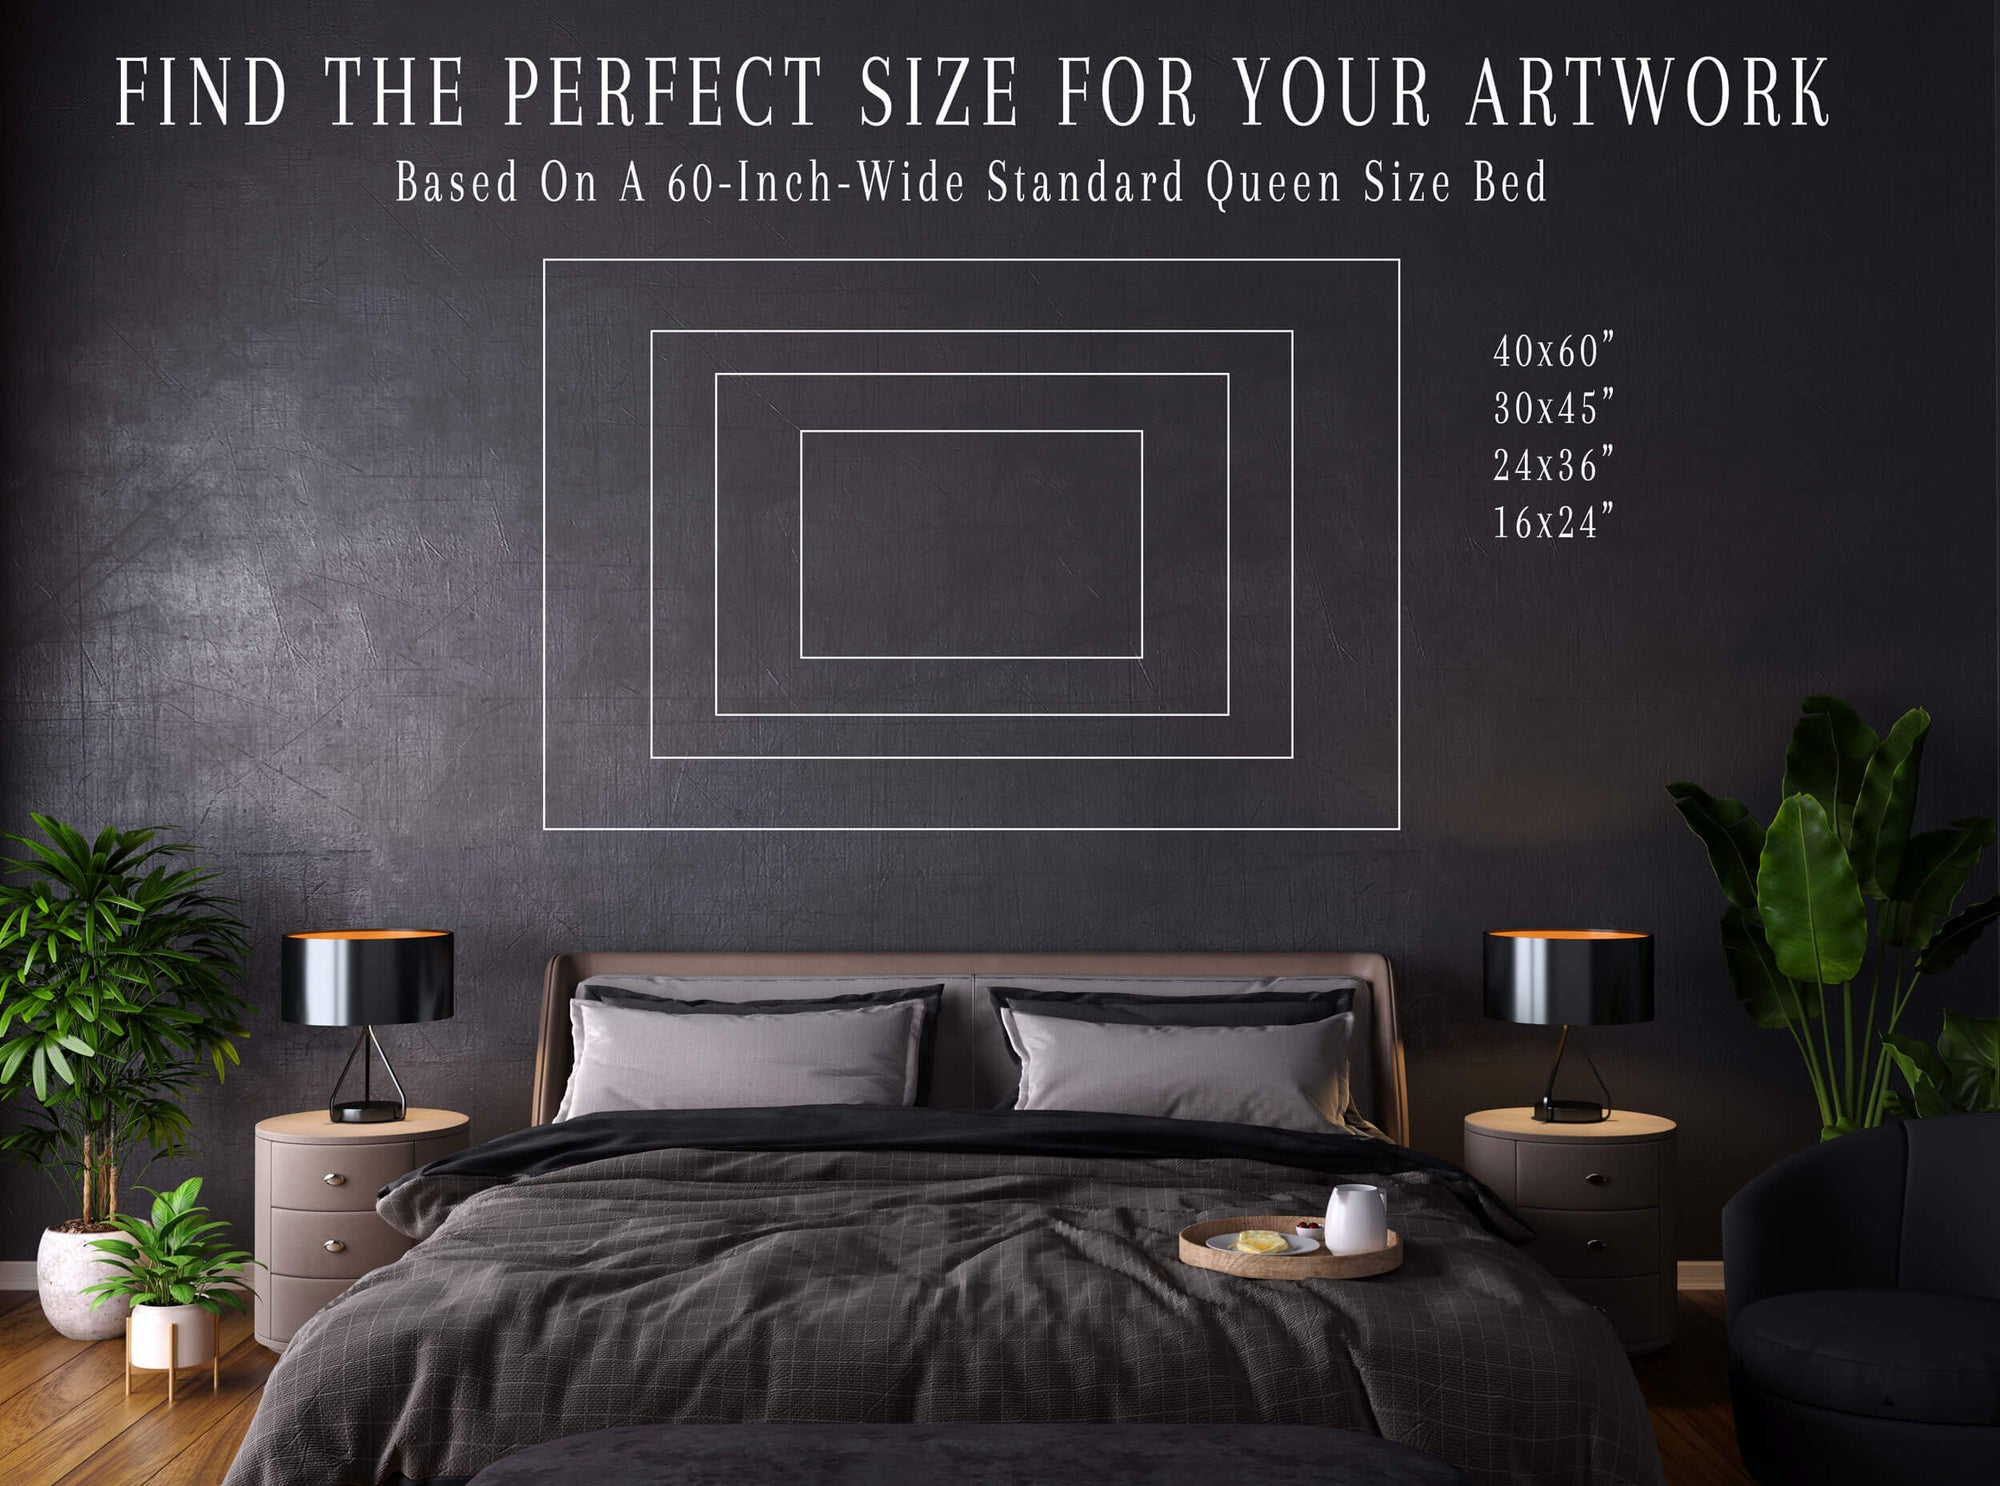 Use this guide to find the right size for your artwork.